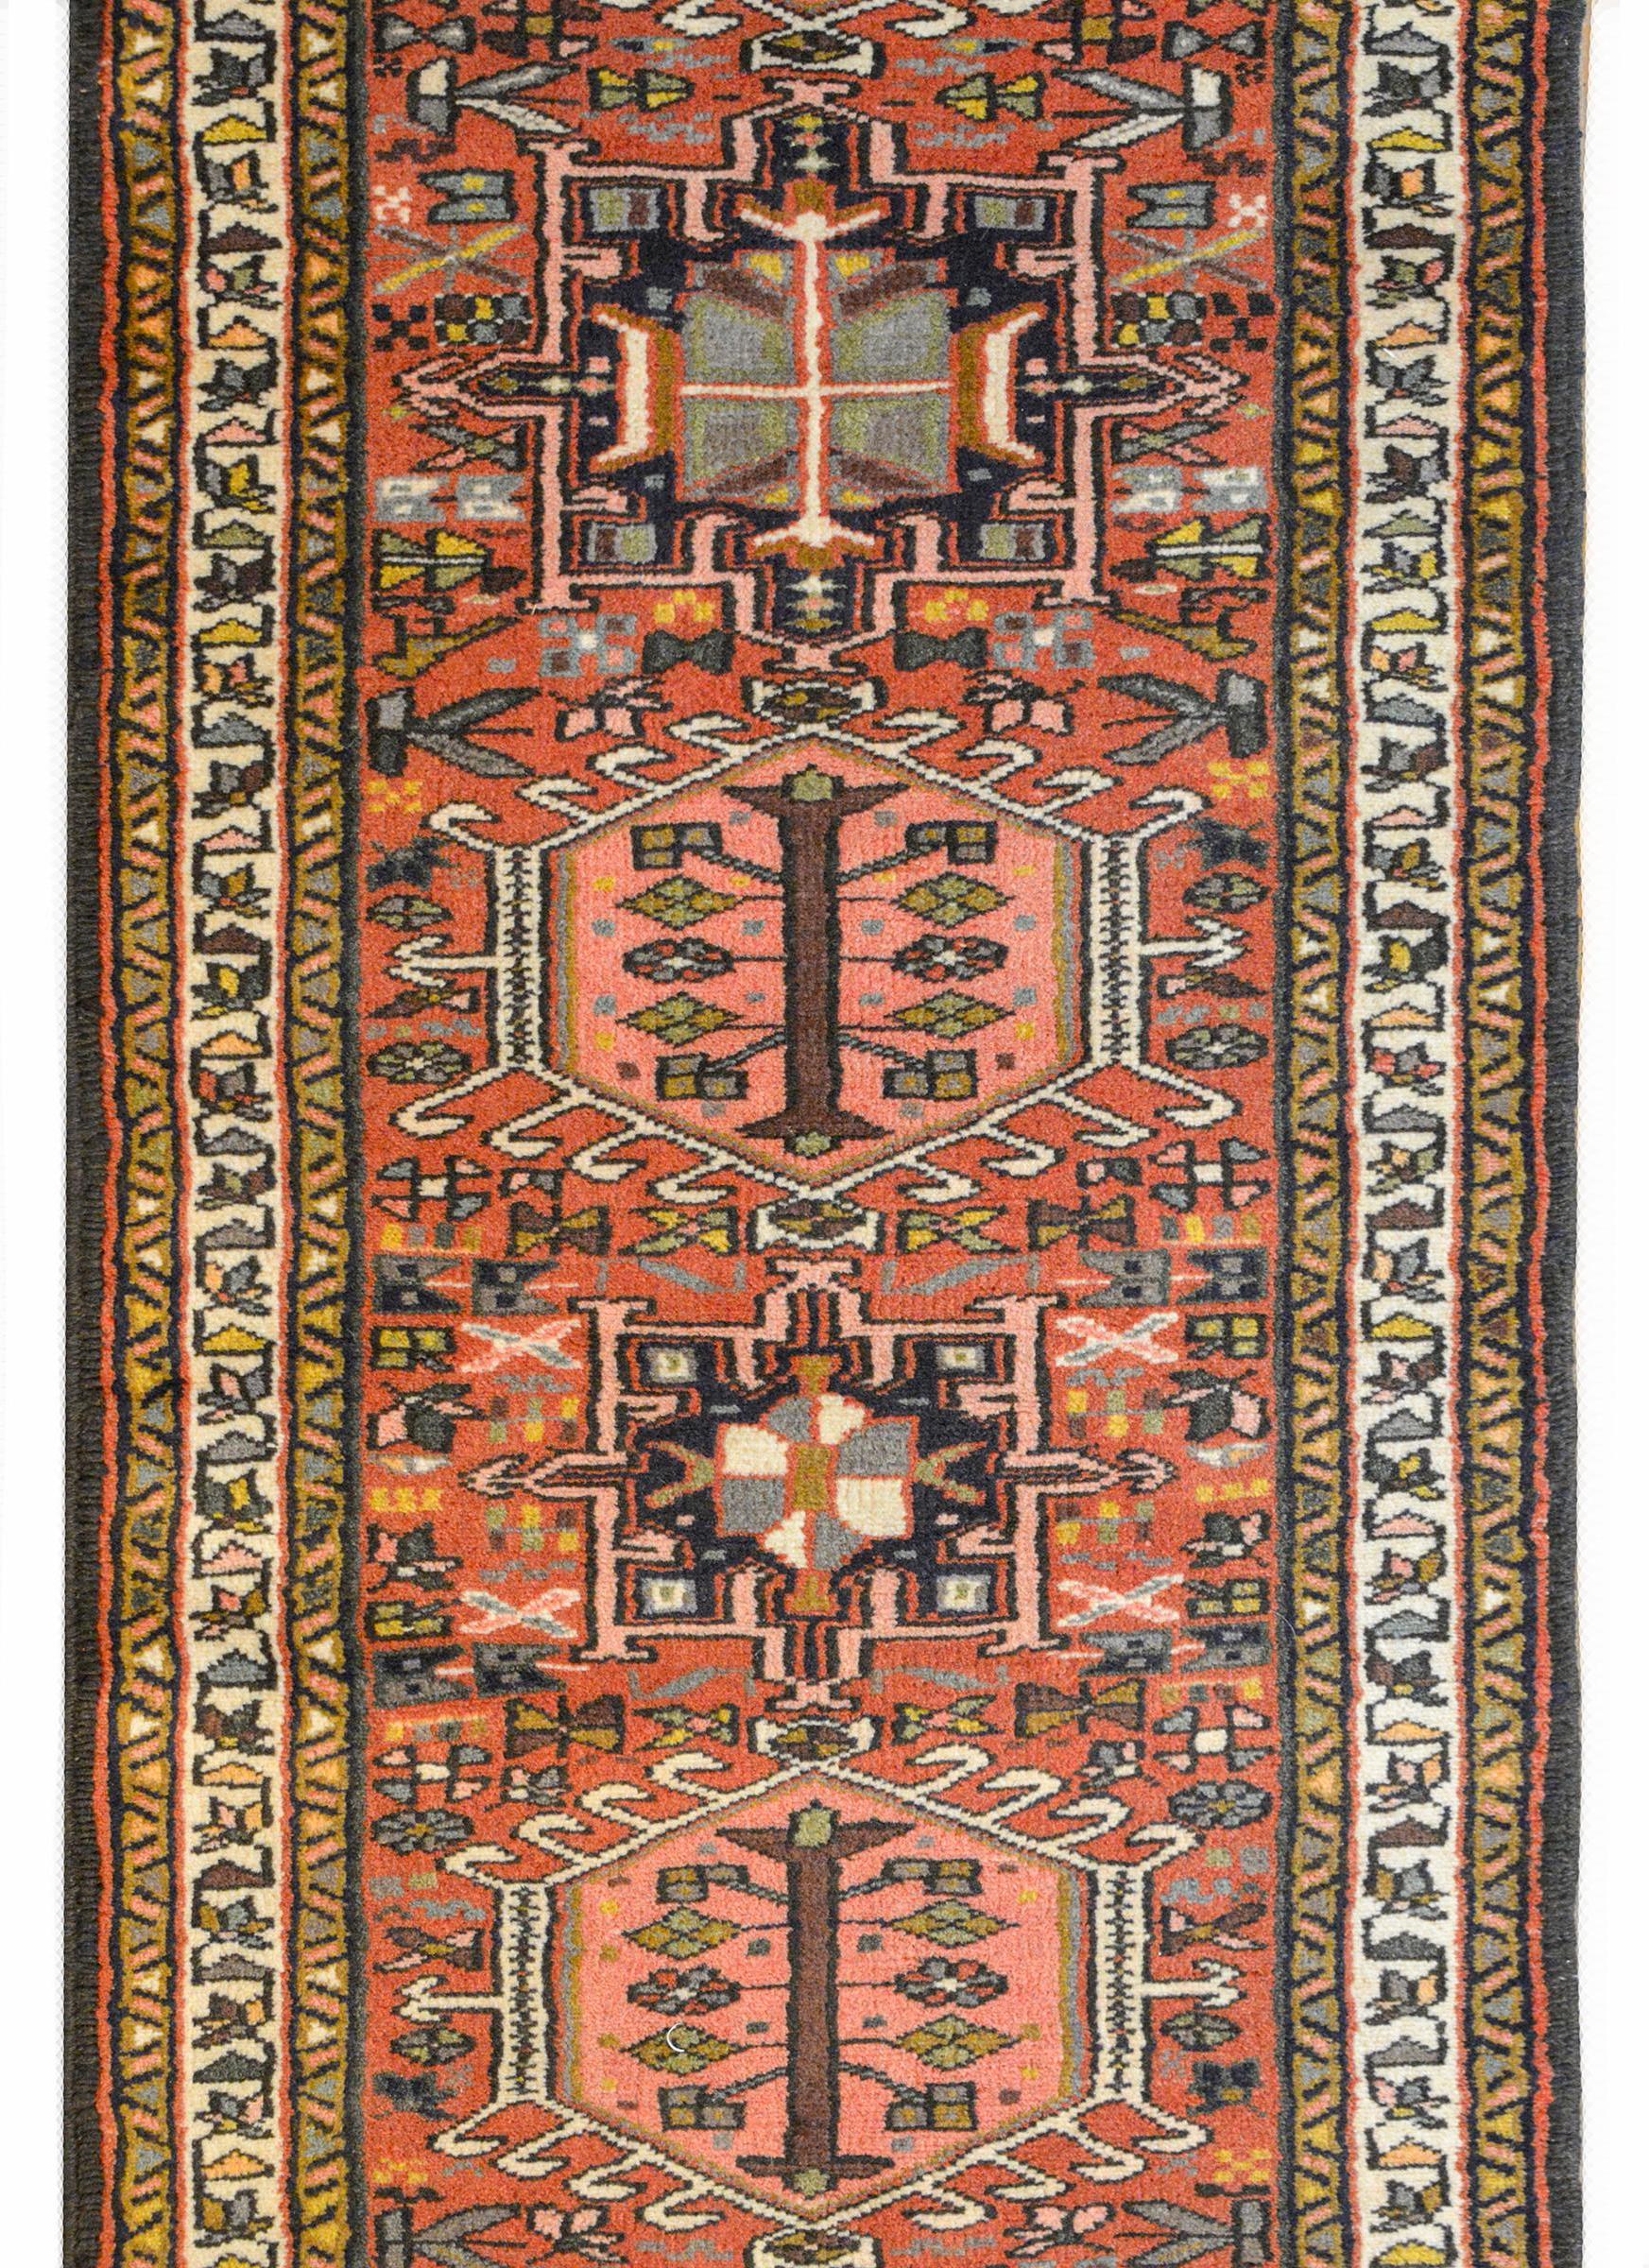 A wonderful mid-20th century Persian Karadja runner with several stylized floral medallions woven in black, pink, light blue, gold and white amidst a field of more stylized flowers against a pale crimson background. The border is wonderful composed